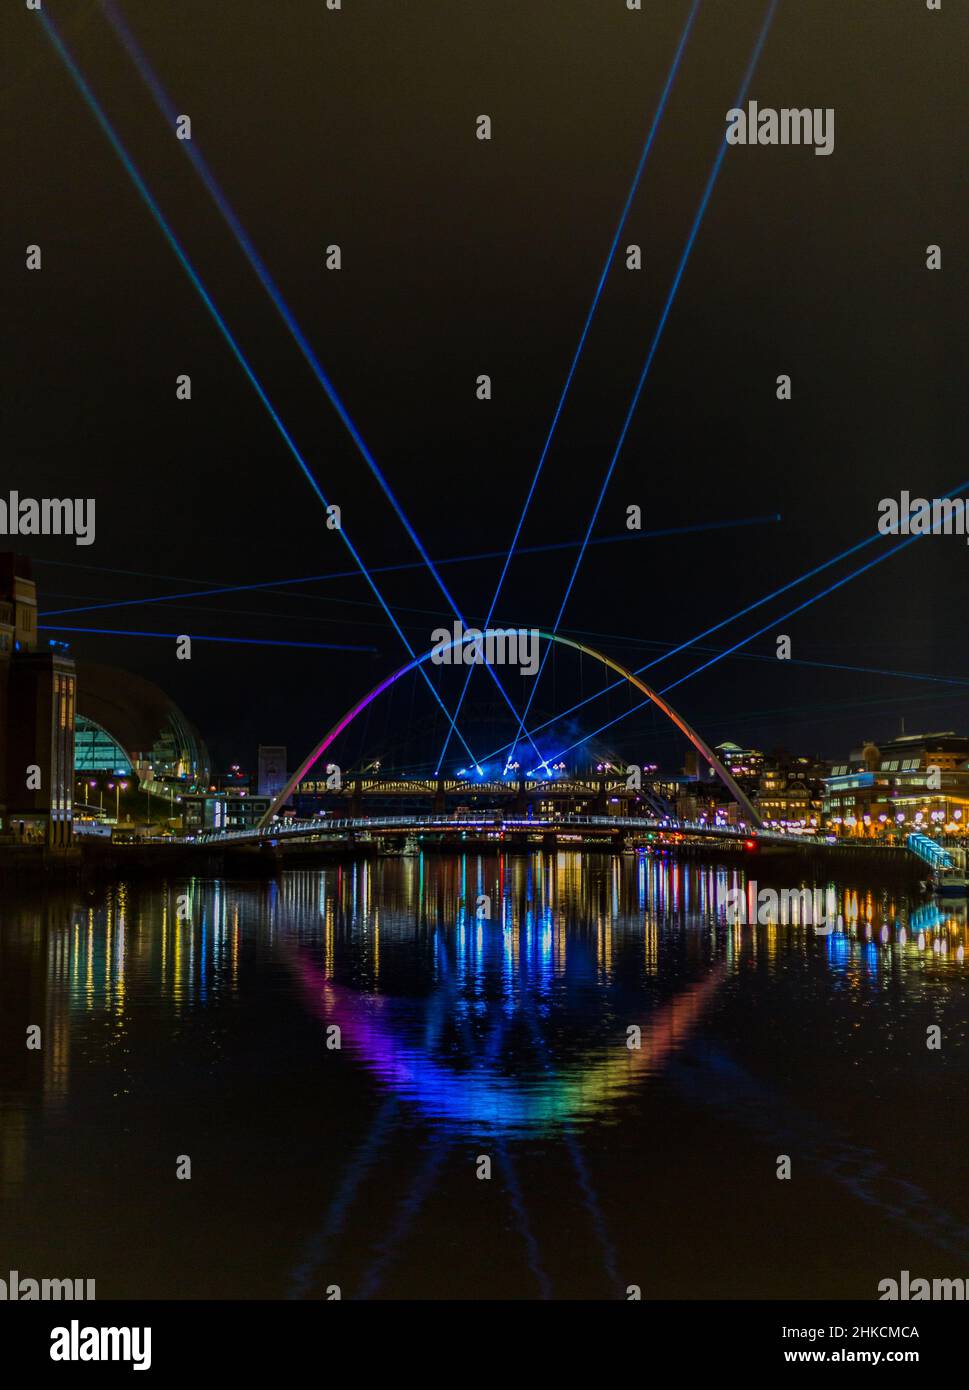 To bring in New Year's Eve in Newcastle, there was a laser show in the city, with the laser beams visible in the River Tyne Stock Photo